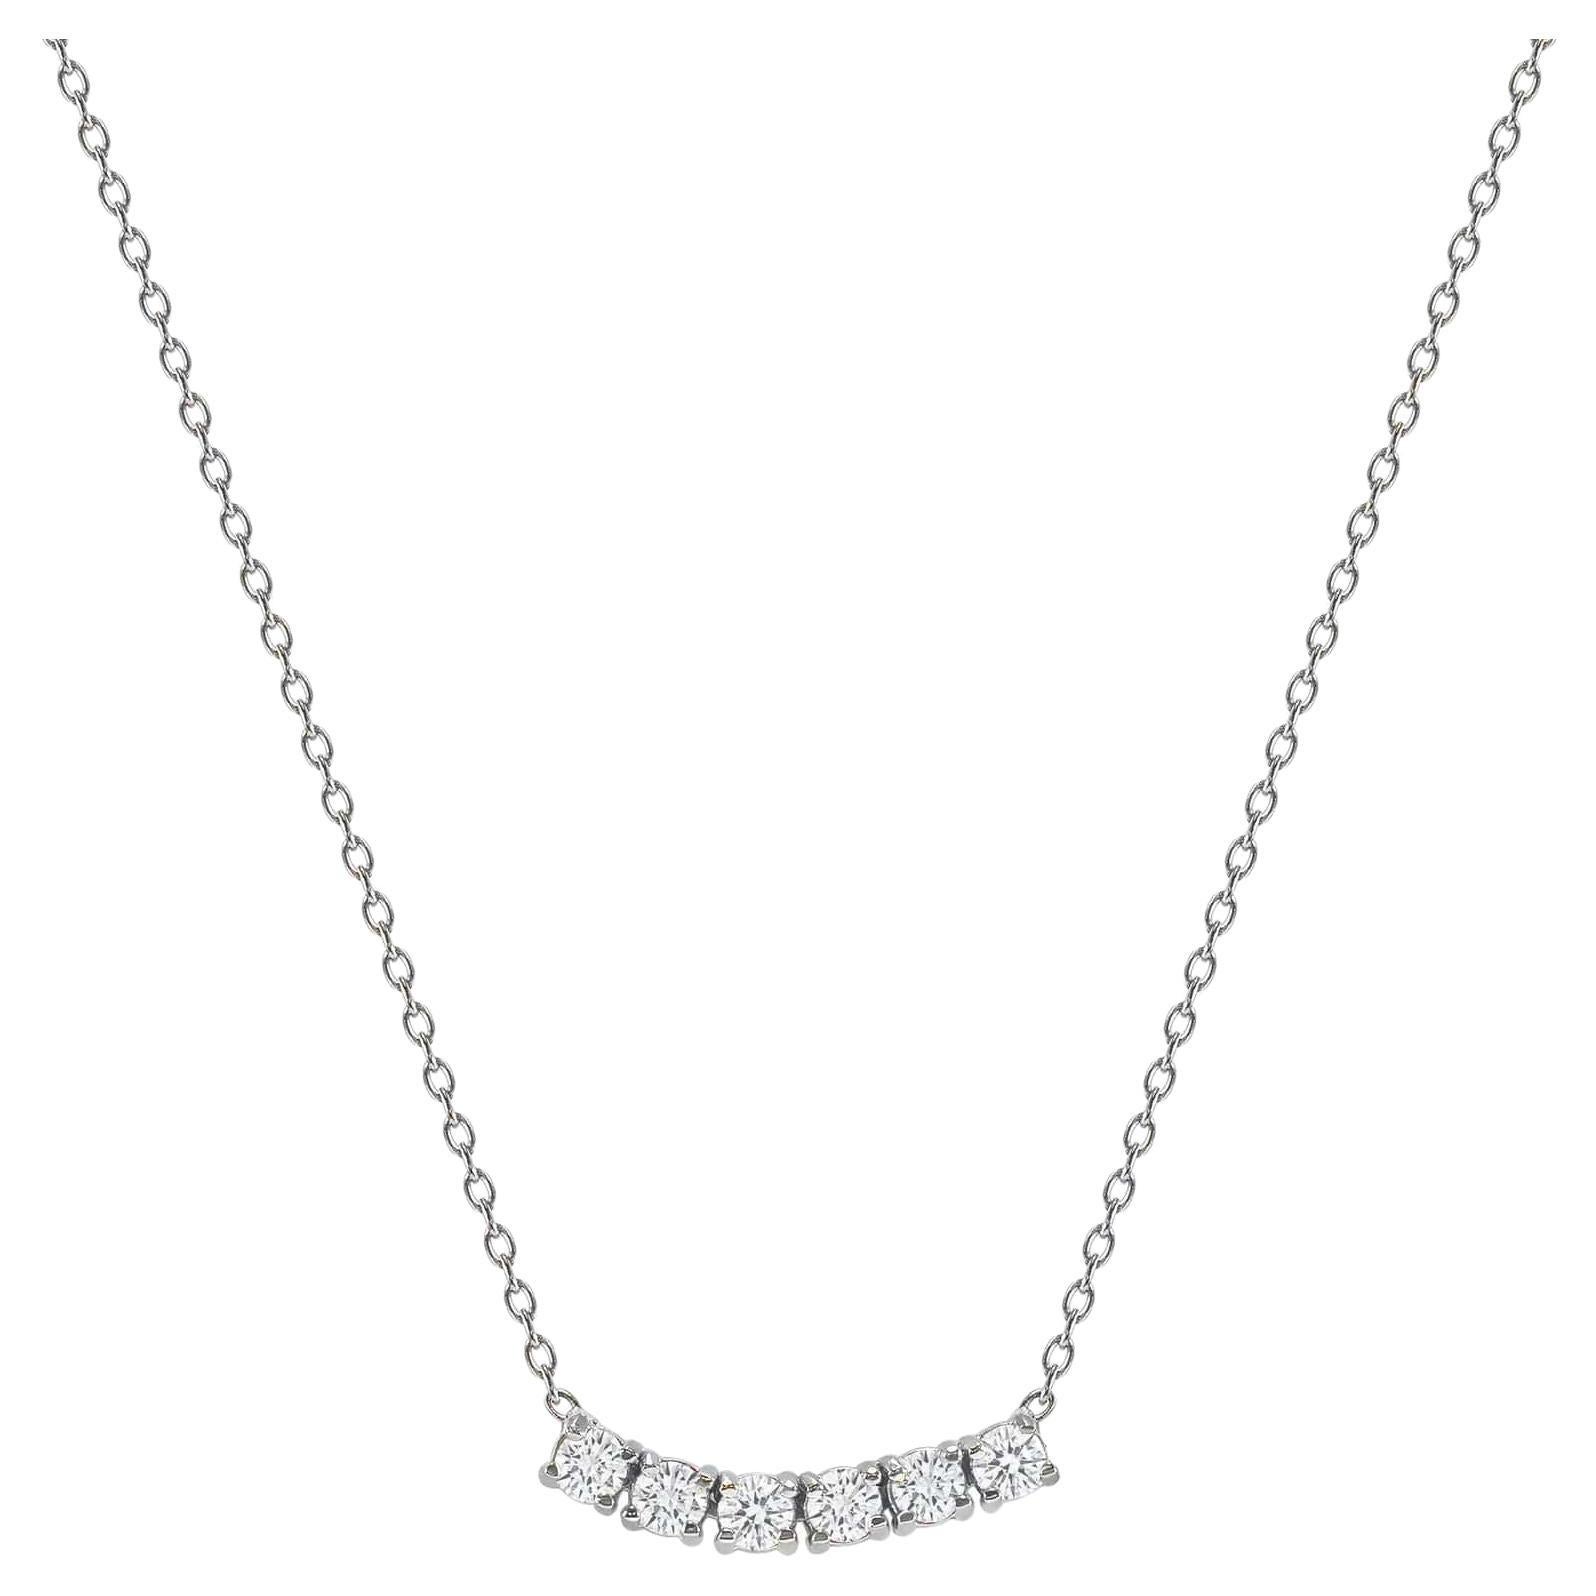 This petite, curved diamond necklace is crafted with gorgeous 14k gold set with six round diamonds
 
Necklace Information
Gold : 14k 
Diamond Total Carats : 0.25ttcw
Diamond Cut : Round (6 diamonds)
Diamond Clarity : VS
Diamond Color : F-G
Color :